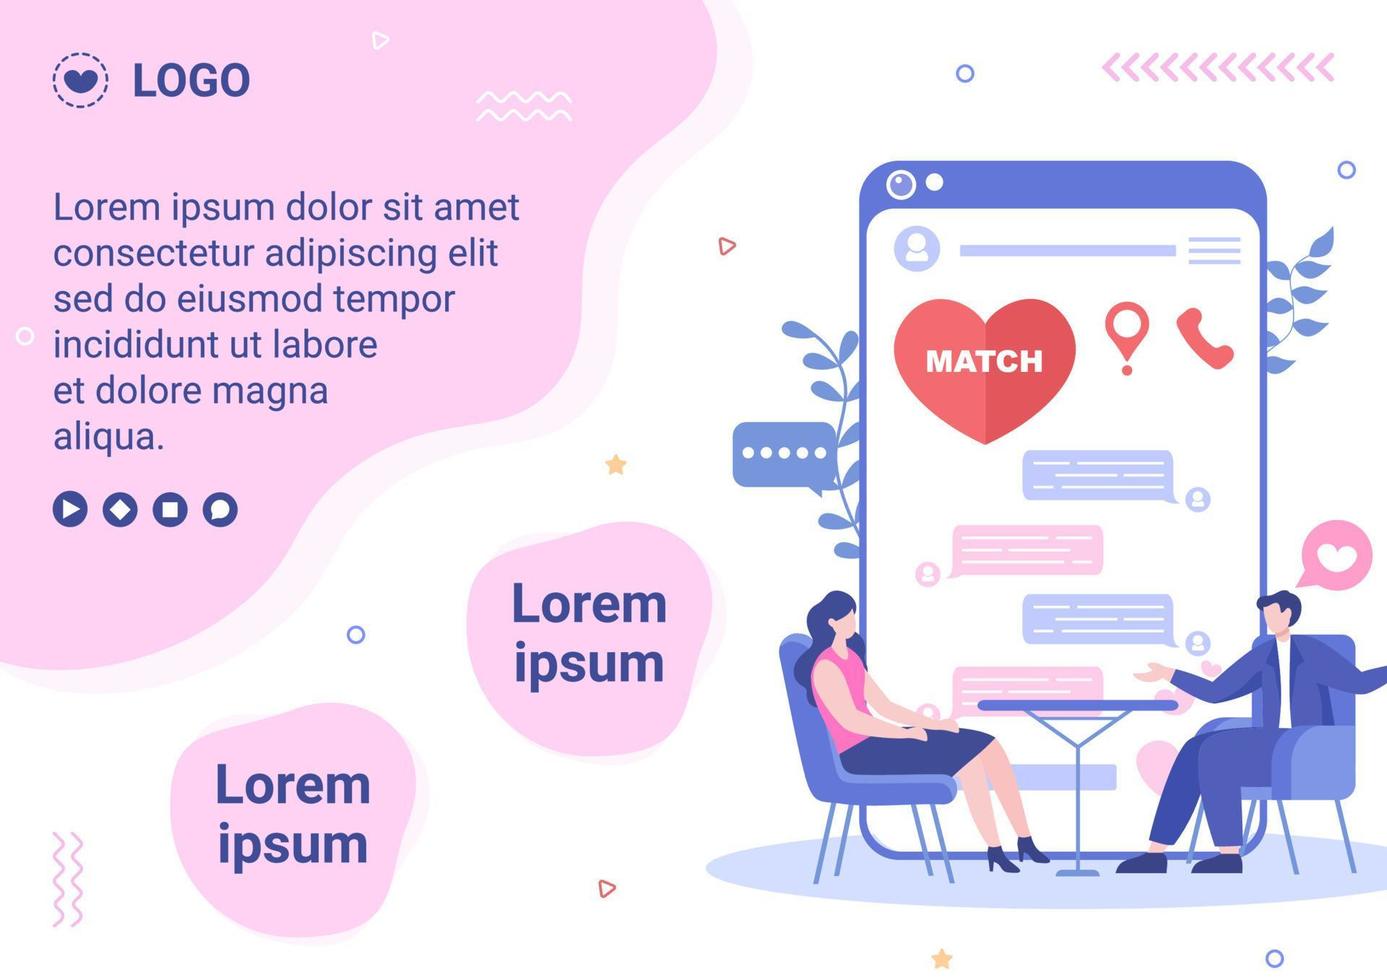 Dating App For a Love Match Brochure Template Flat Design Illustration Editable of Square Background Suitable to Social Media or Valentine Greetings Card vector